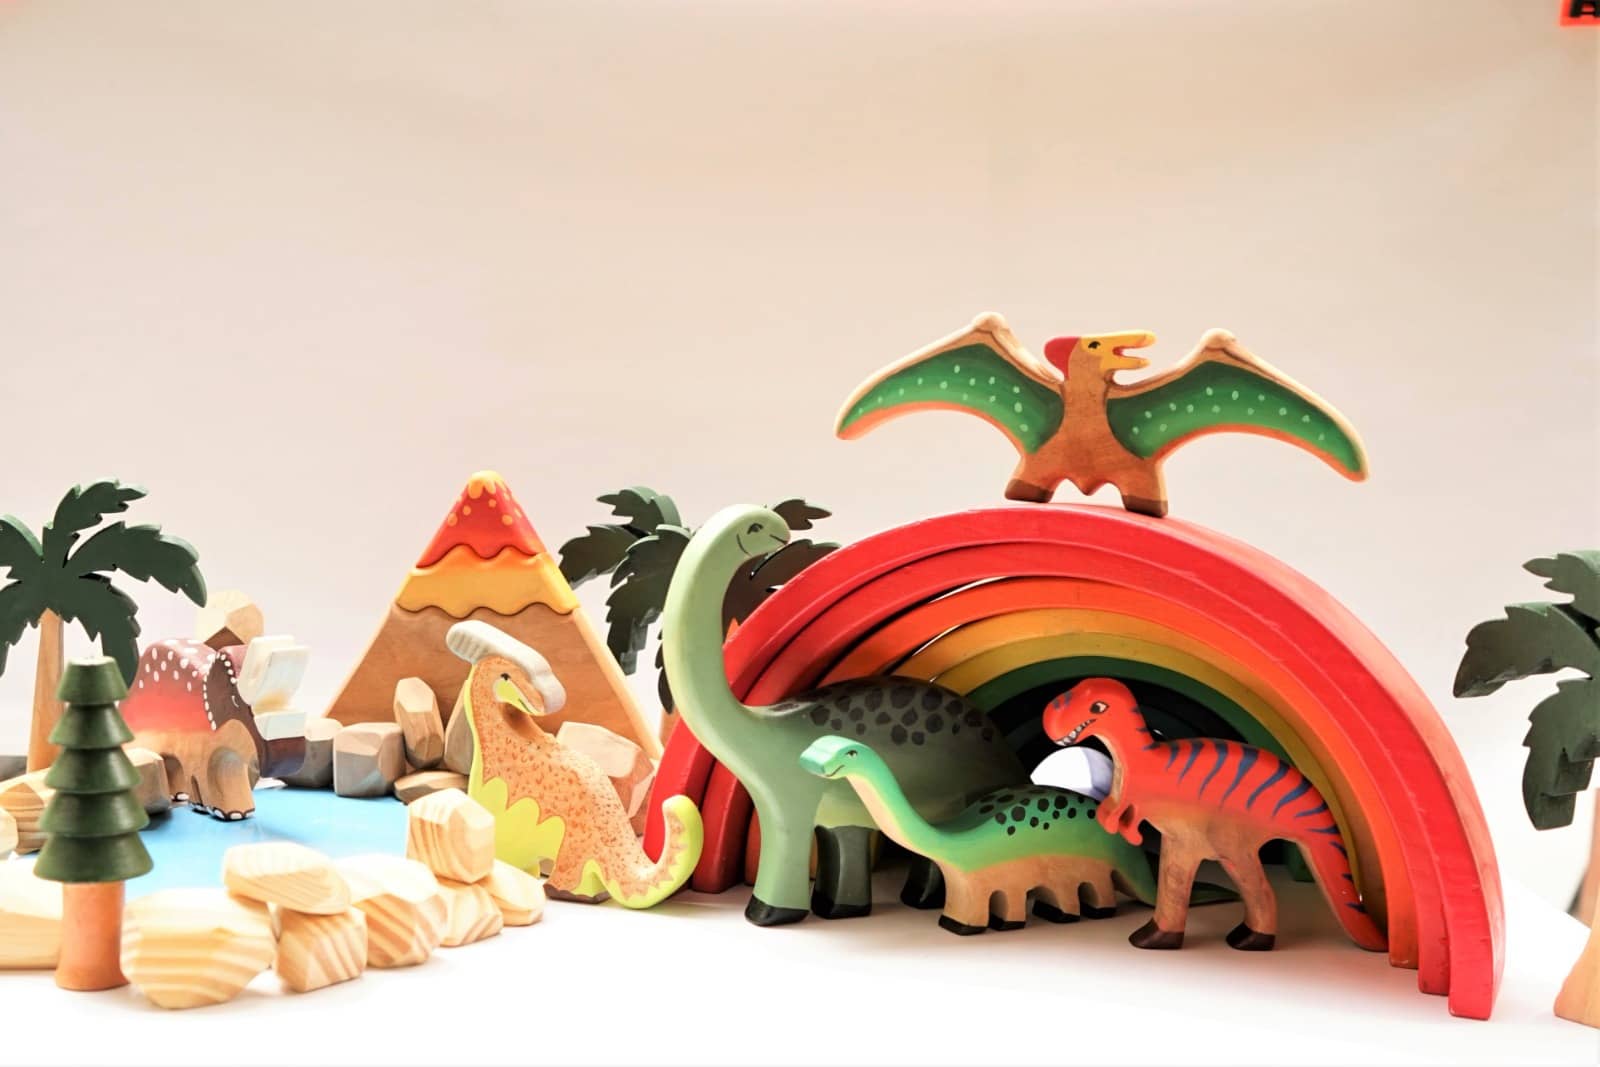 Read more about the article Benefits of playing with wooden figurine toys.